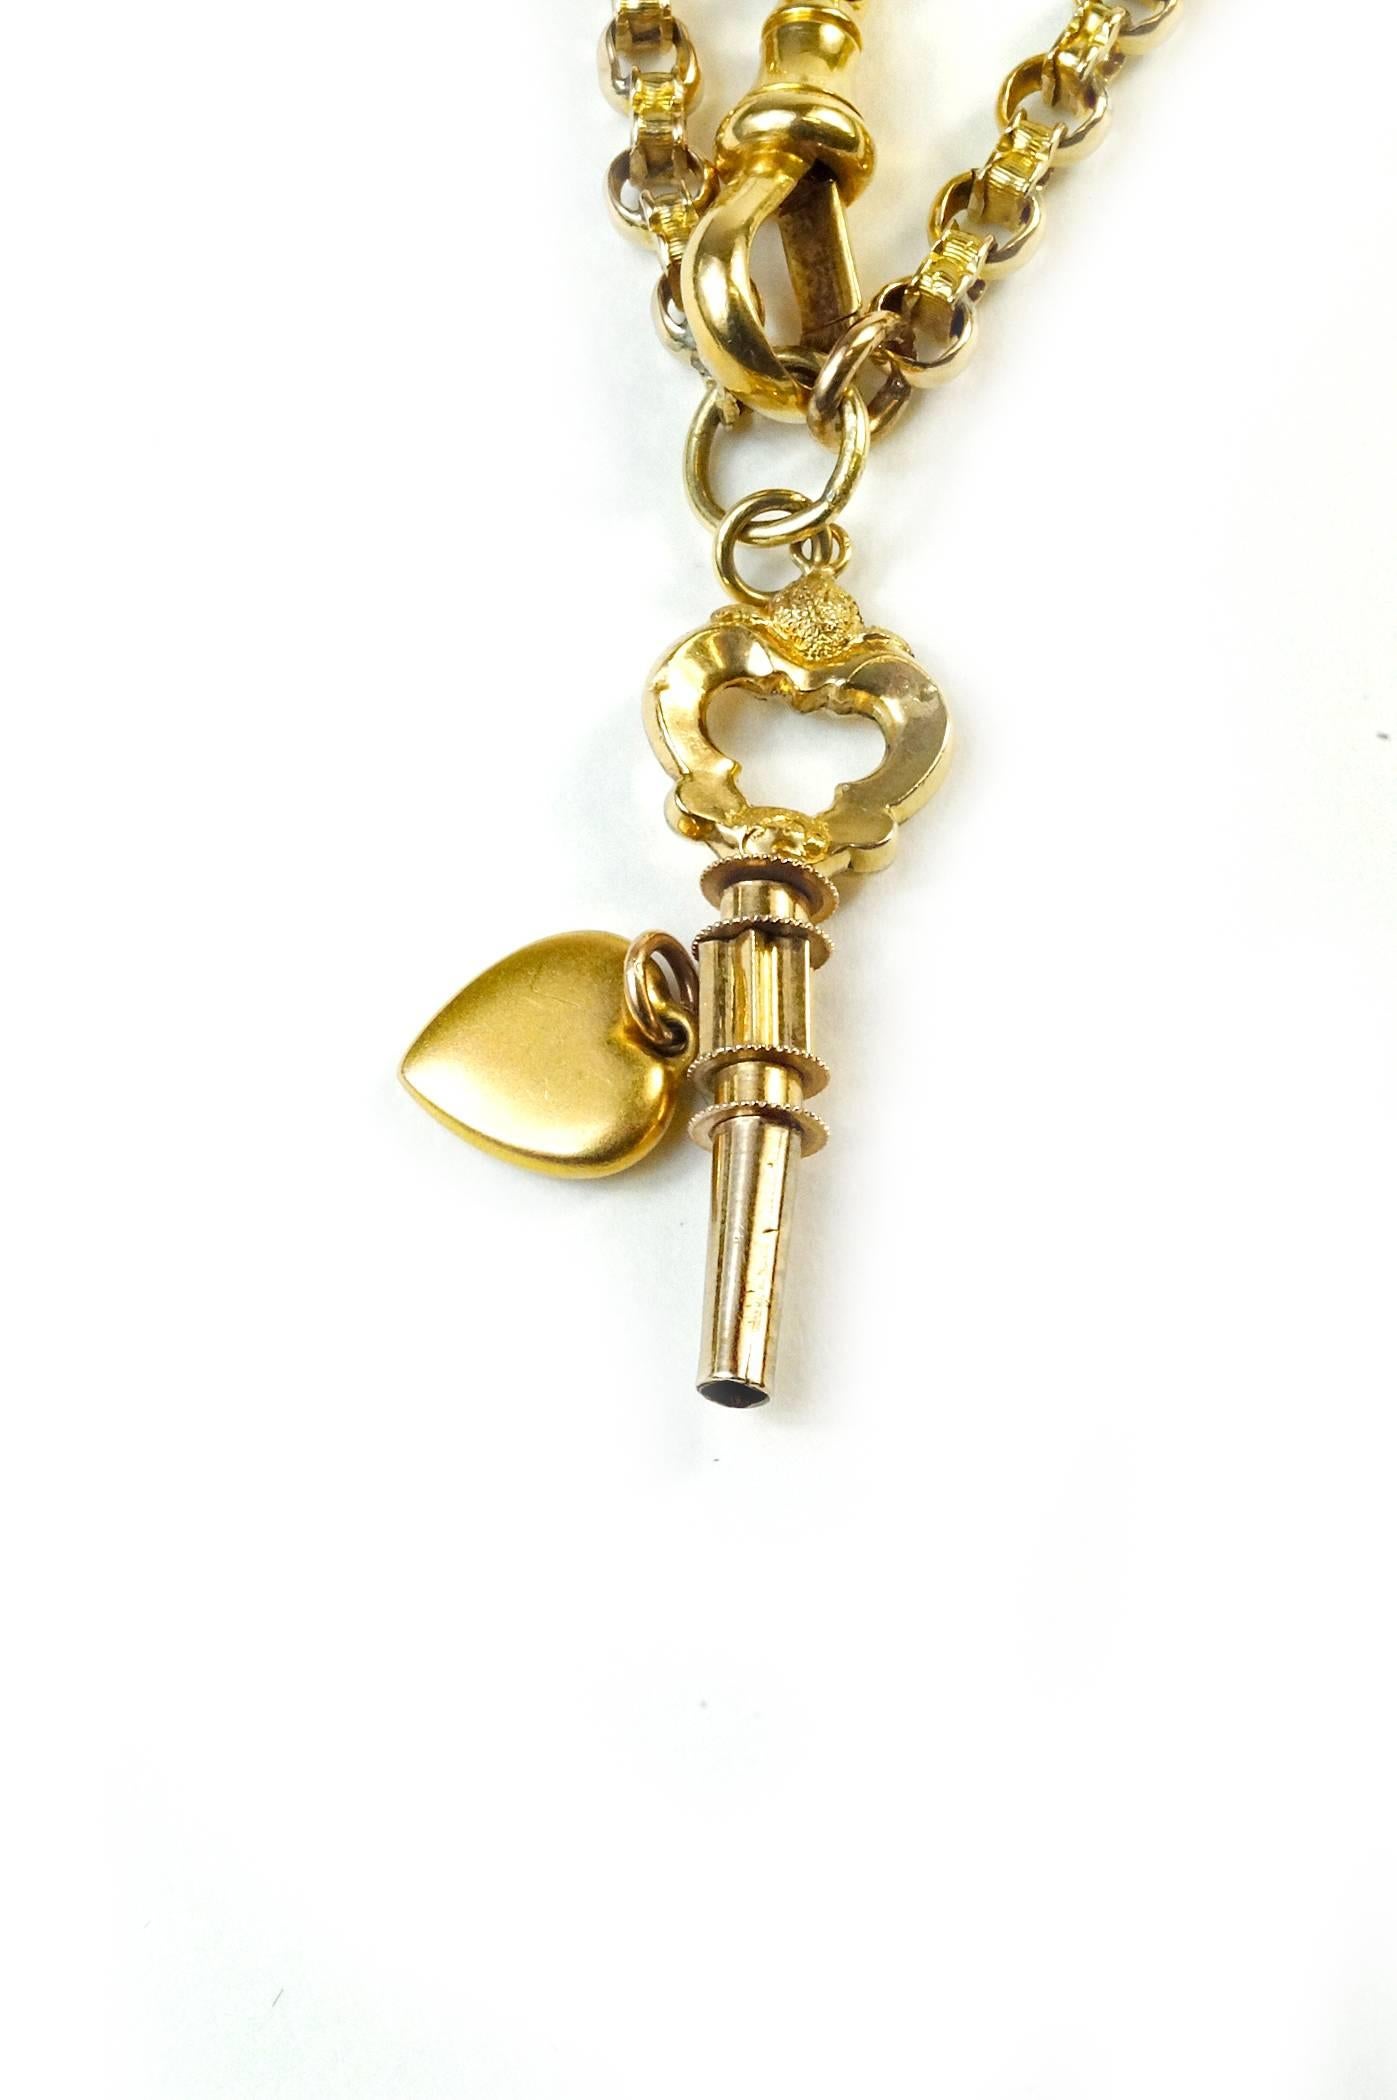 Vintage Charm Heart Necklace In Excellent Condition For Sale In Houston, TX